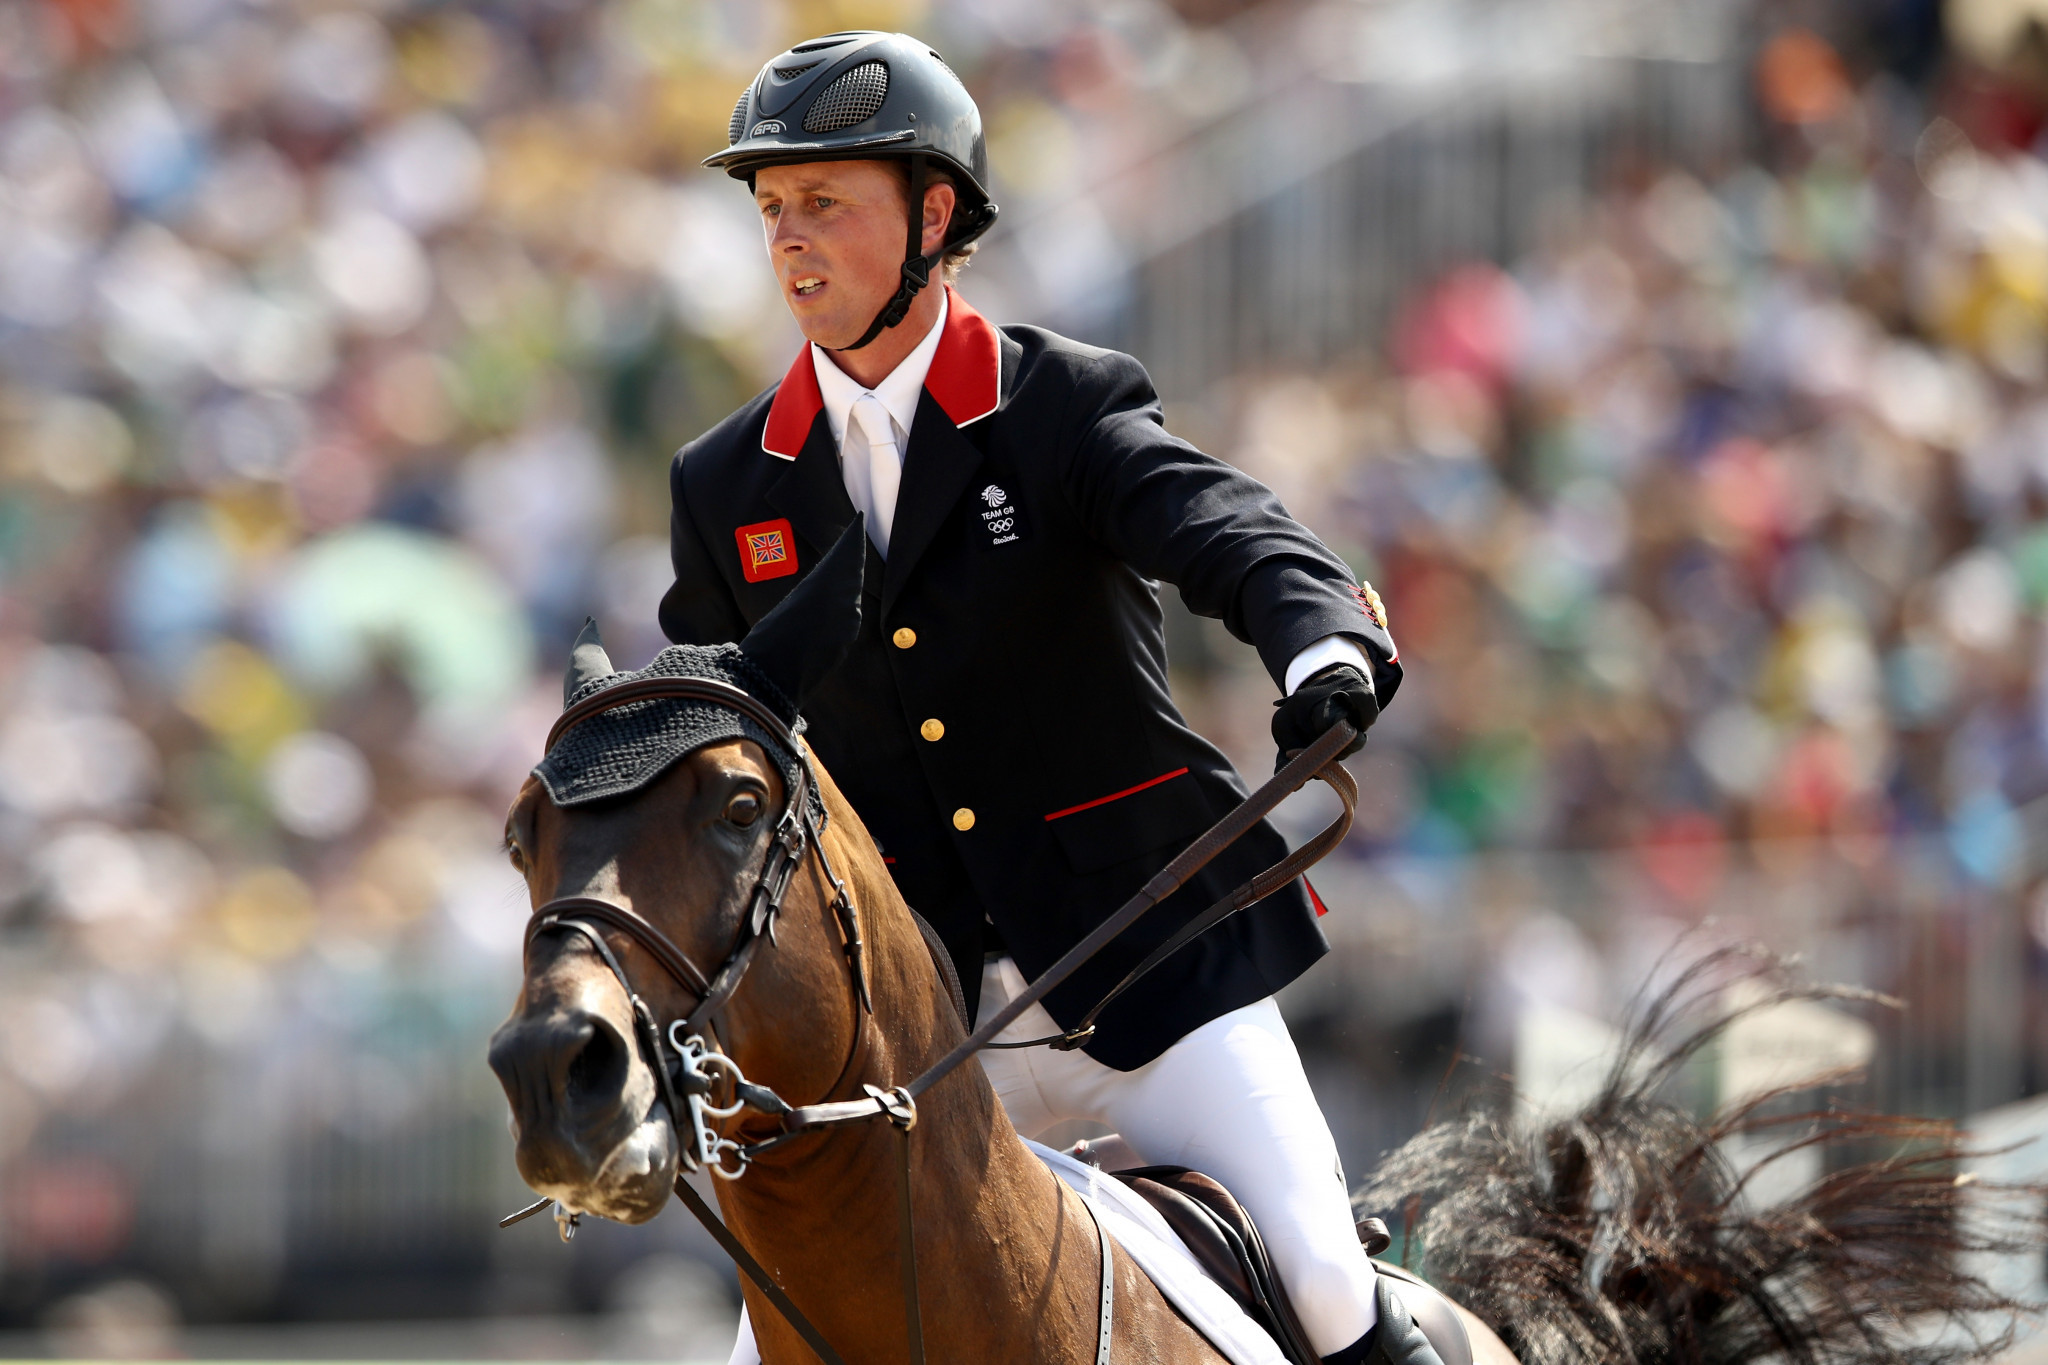 Ben Maher claimed victory in Madrid ©Getty Images